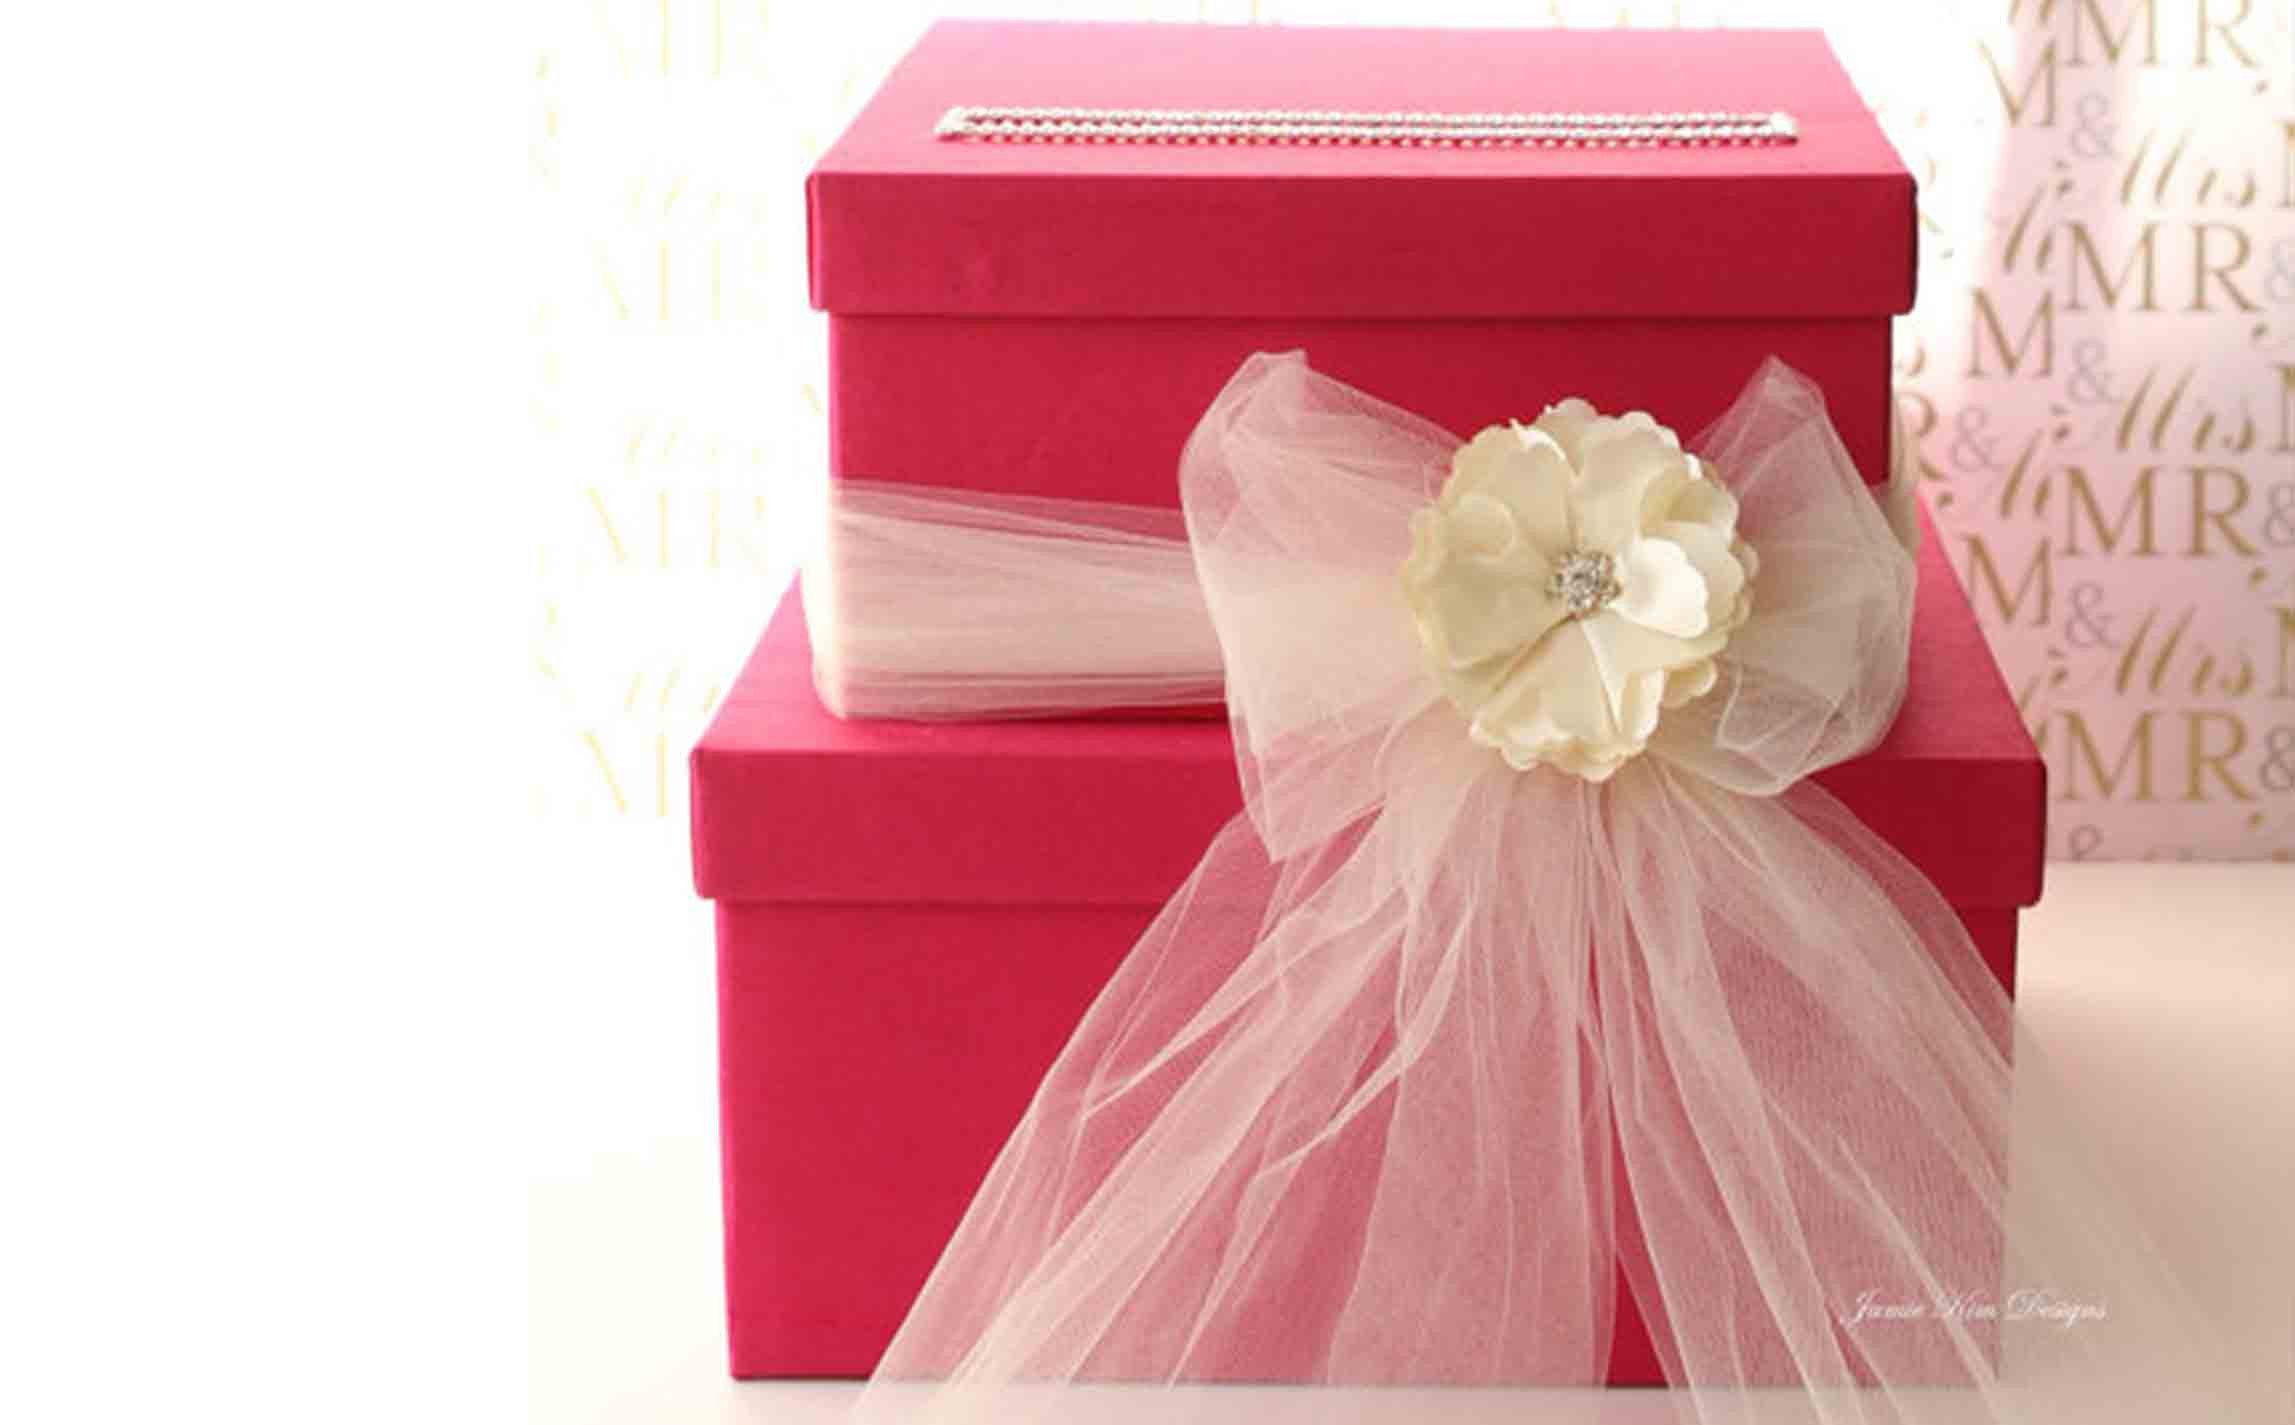 Wedding Gift Cards Ideas
 8 Ways to Stop Wedding Gift Cards from Being Stolen